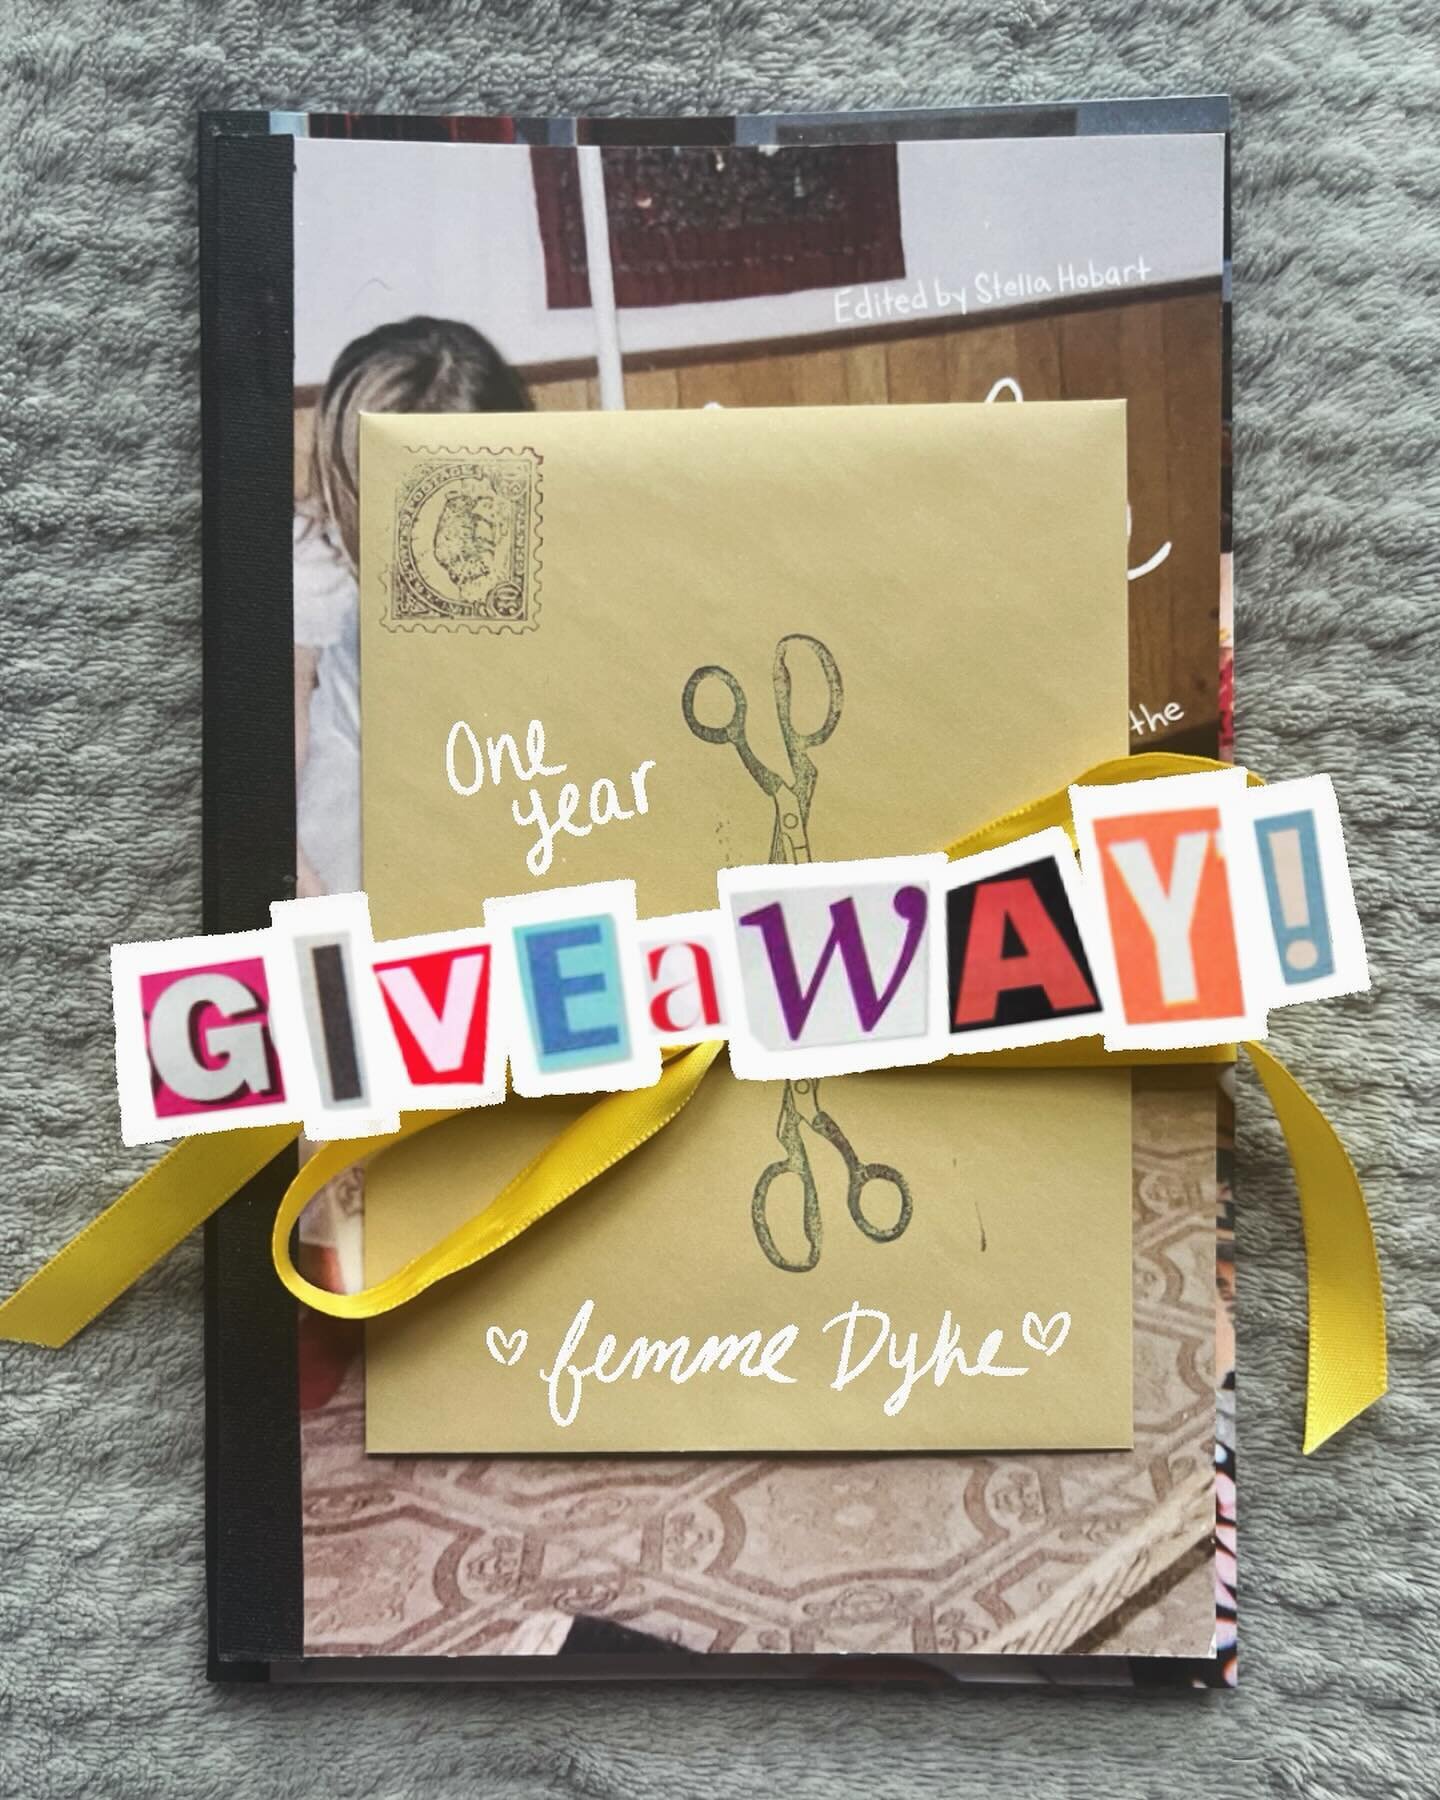 Hey guys! With the one year anniversary of the release of Femme Dyke Zine a week away, I thought i&rsquo;d do something fun to celebrate! I&rsquo;m doing a little giveaway of Femme Dyke (the last available copy i may add), Diary of a Dyke, the Lesbia